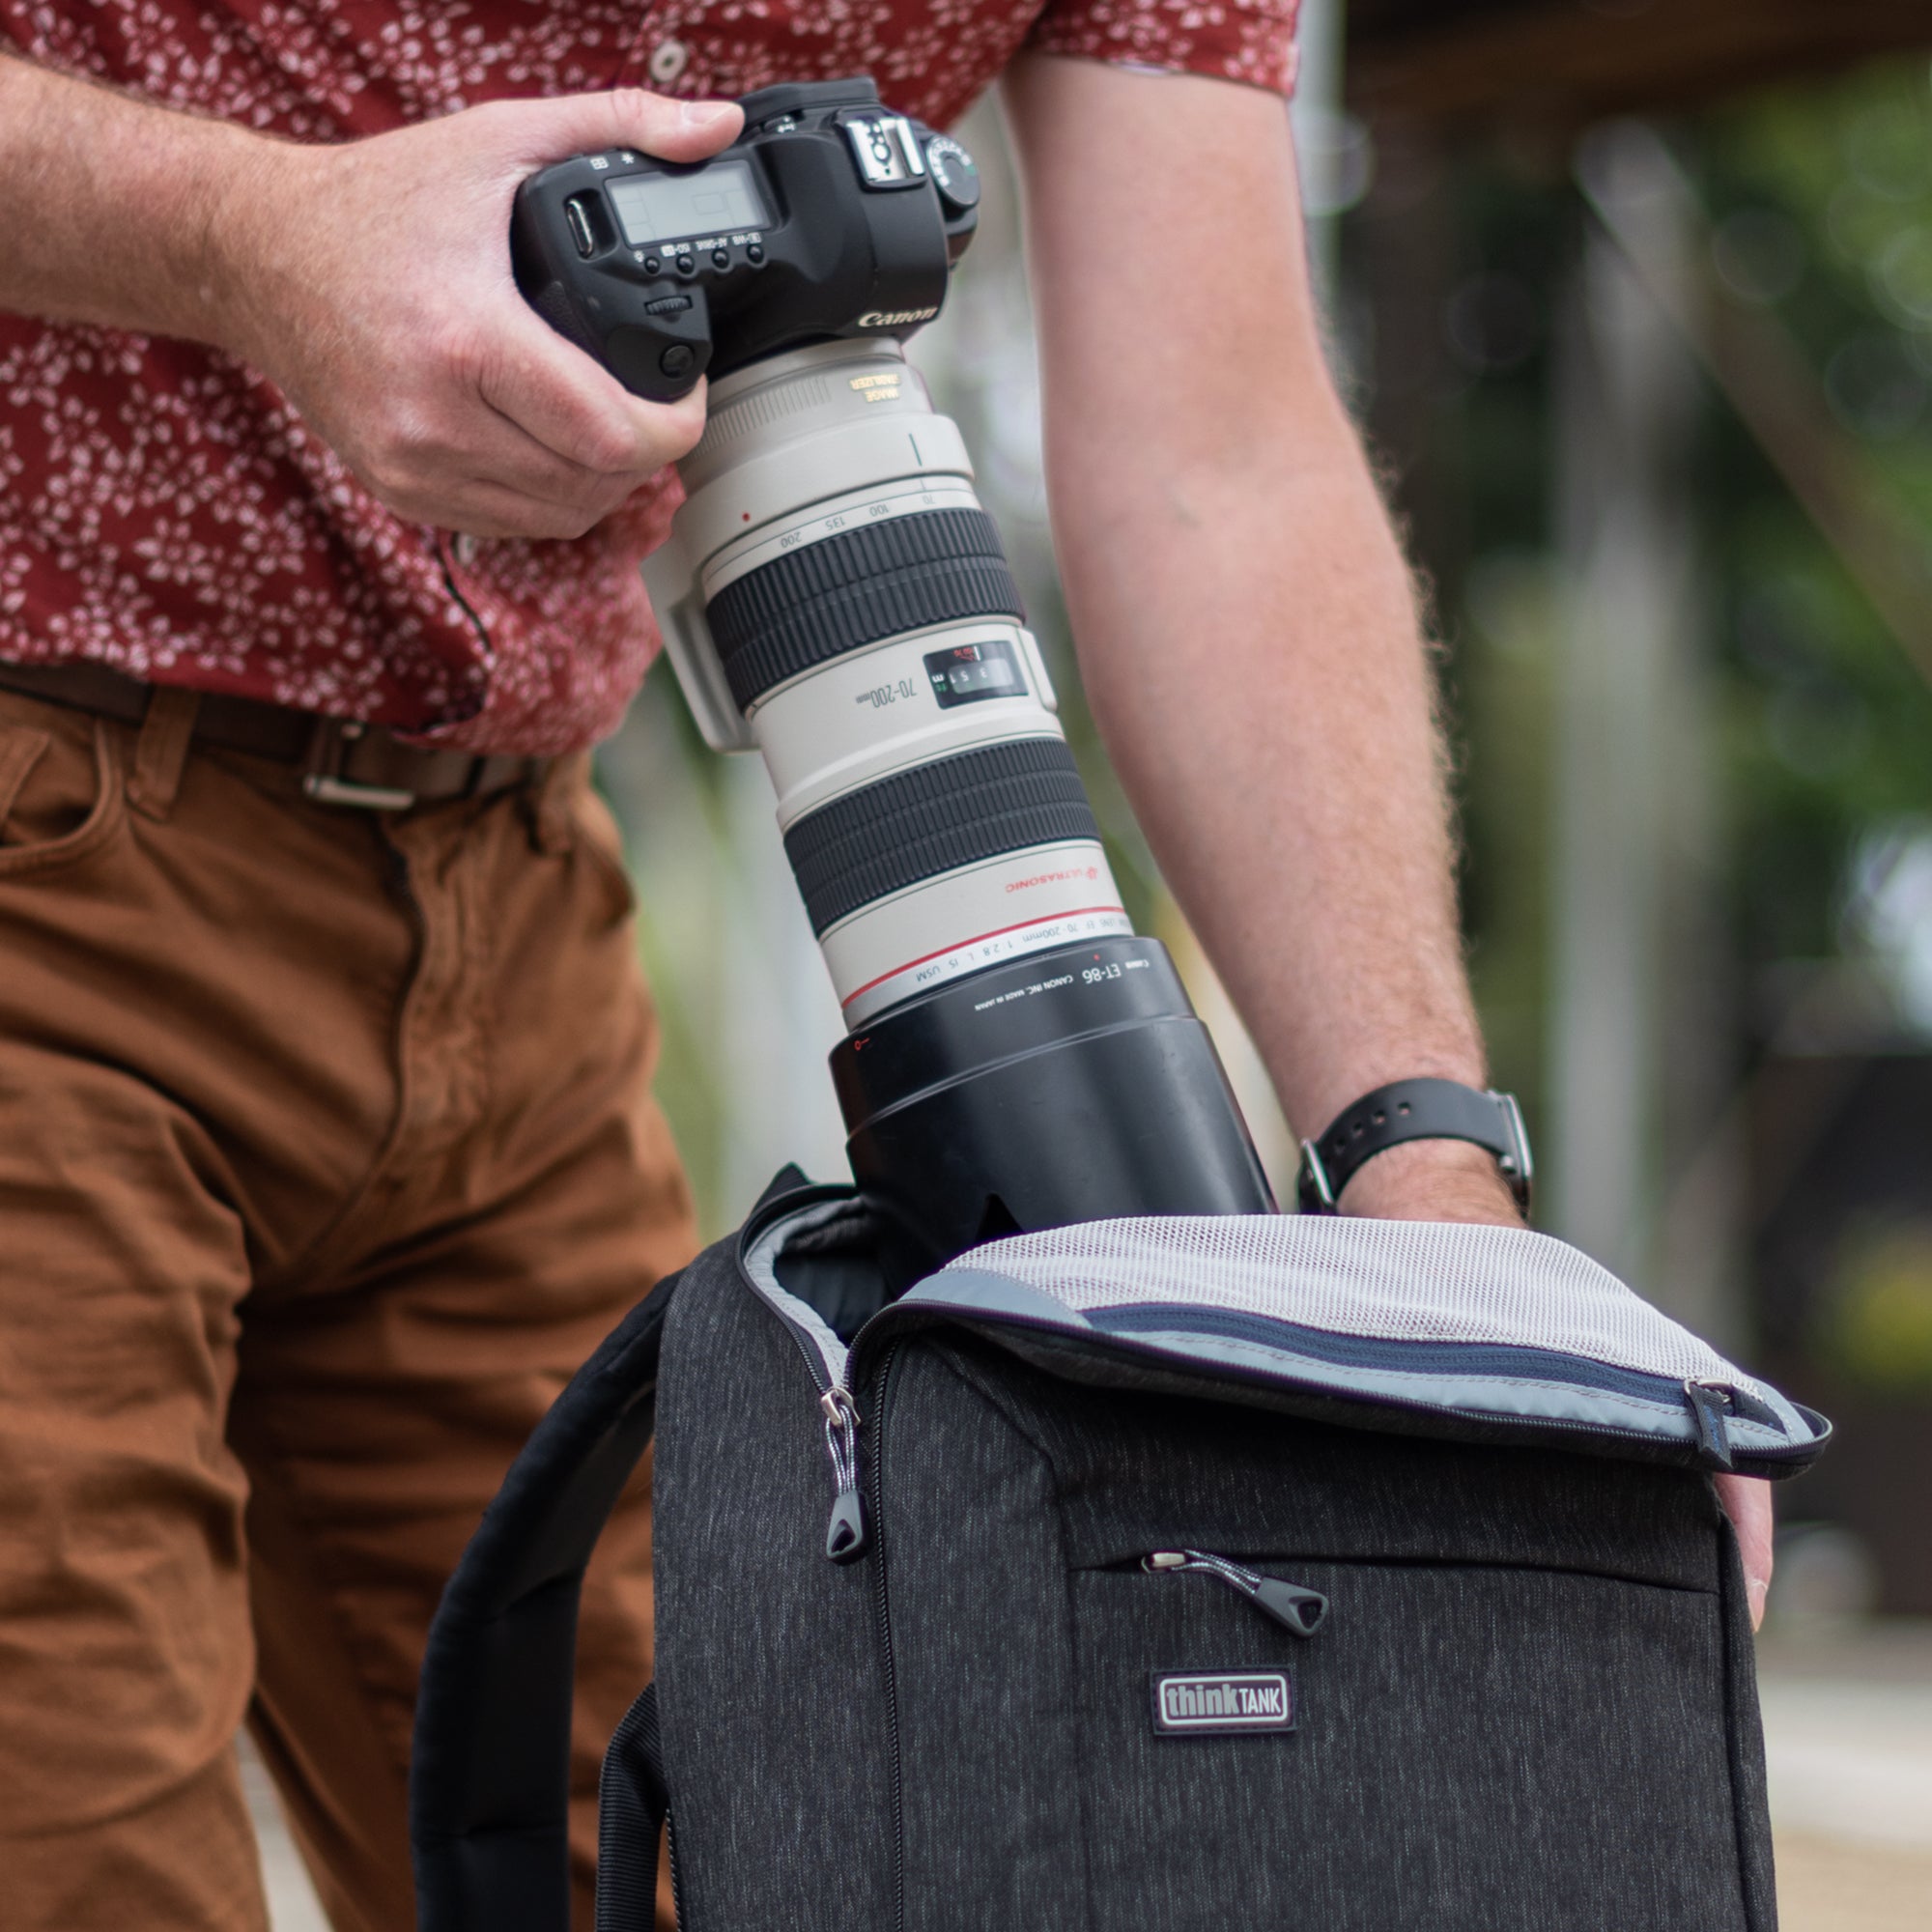 Top zippered panel provides quick access to camera gear